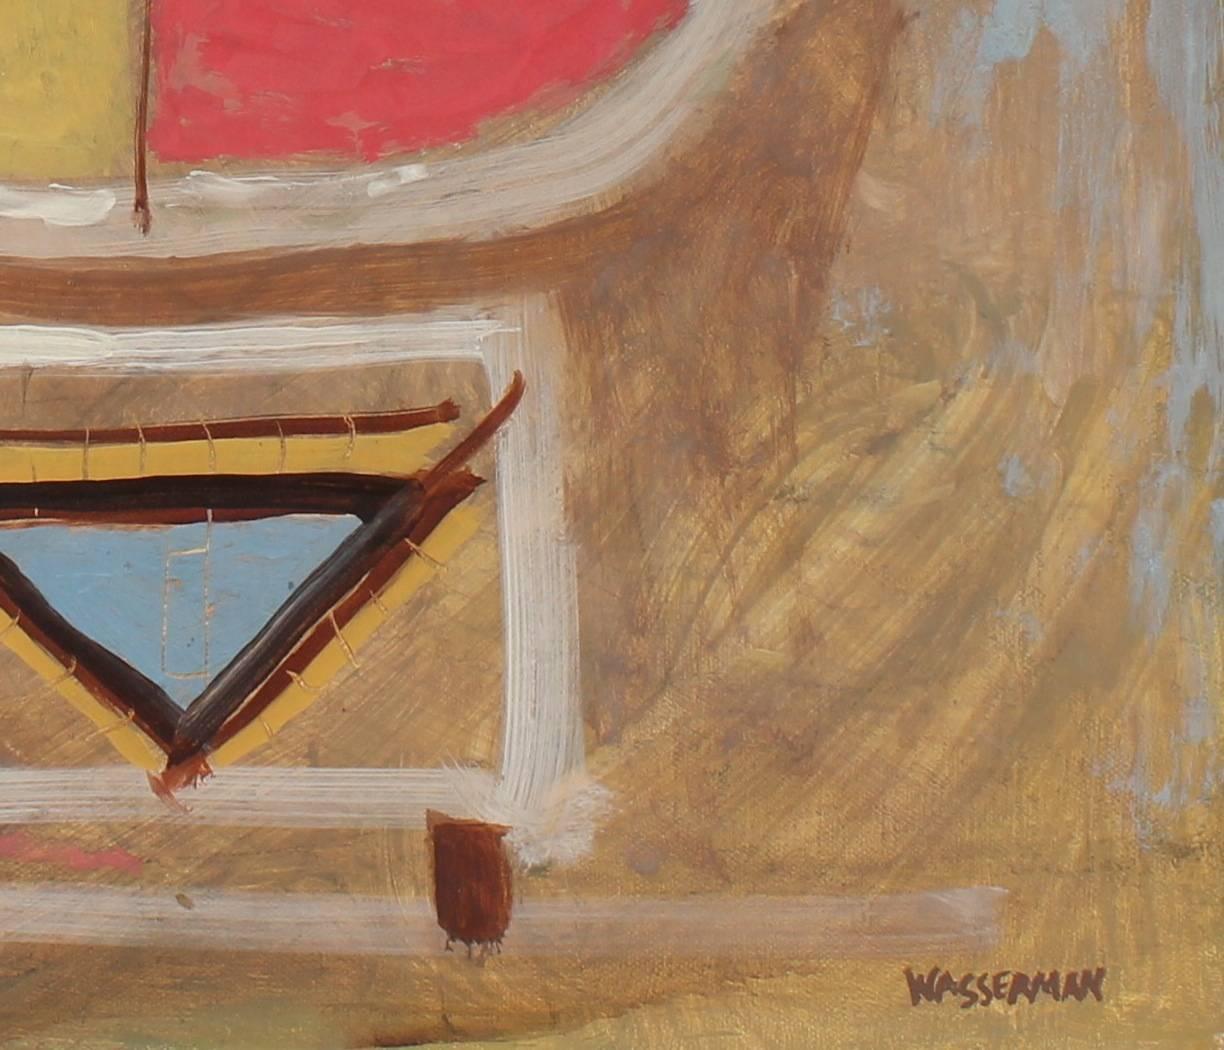 Modernist Totemic Abstract in Oil, Mid 20th Century - Painting by Gerald Wasserman